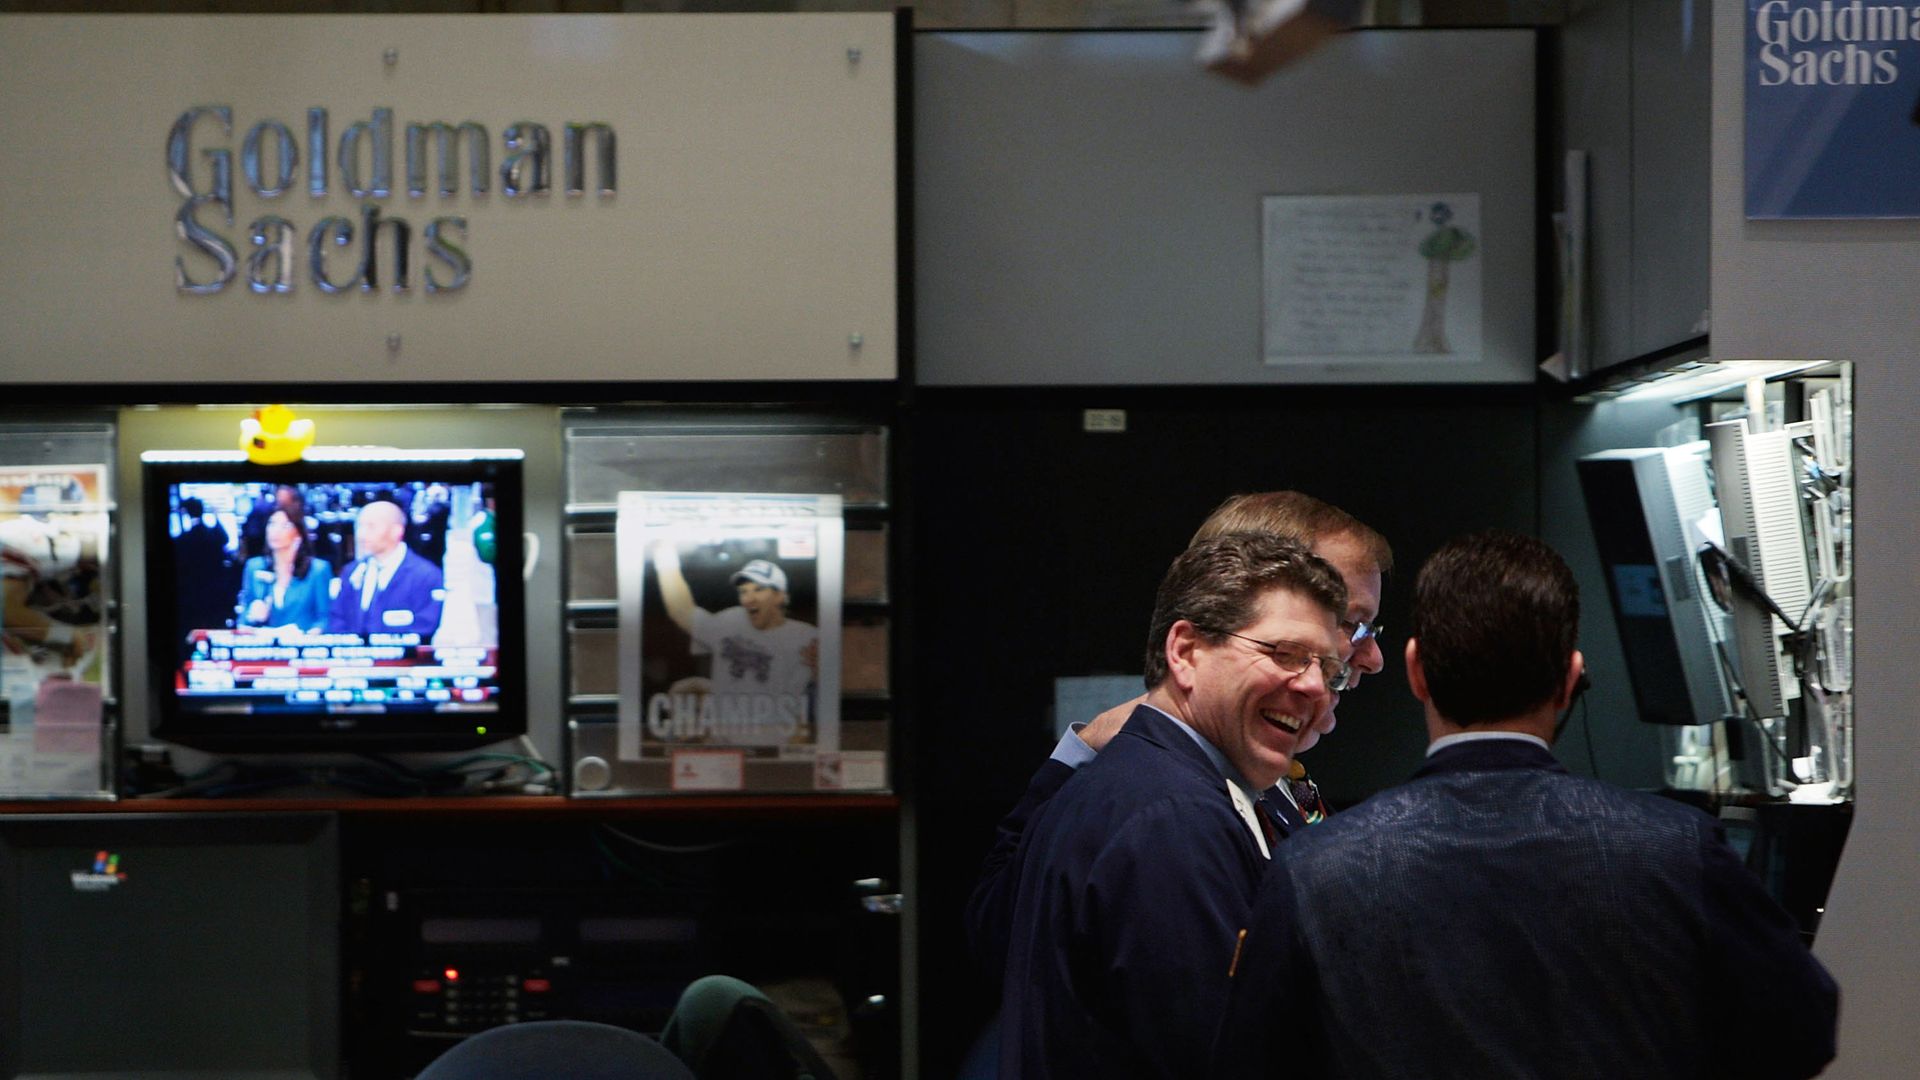 In this image, two men laugh in the Goldman Sachs booth at the New York Stock Exchange. 